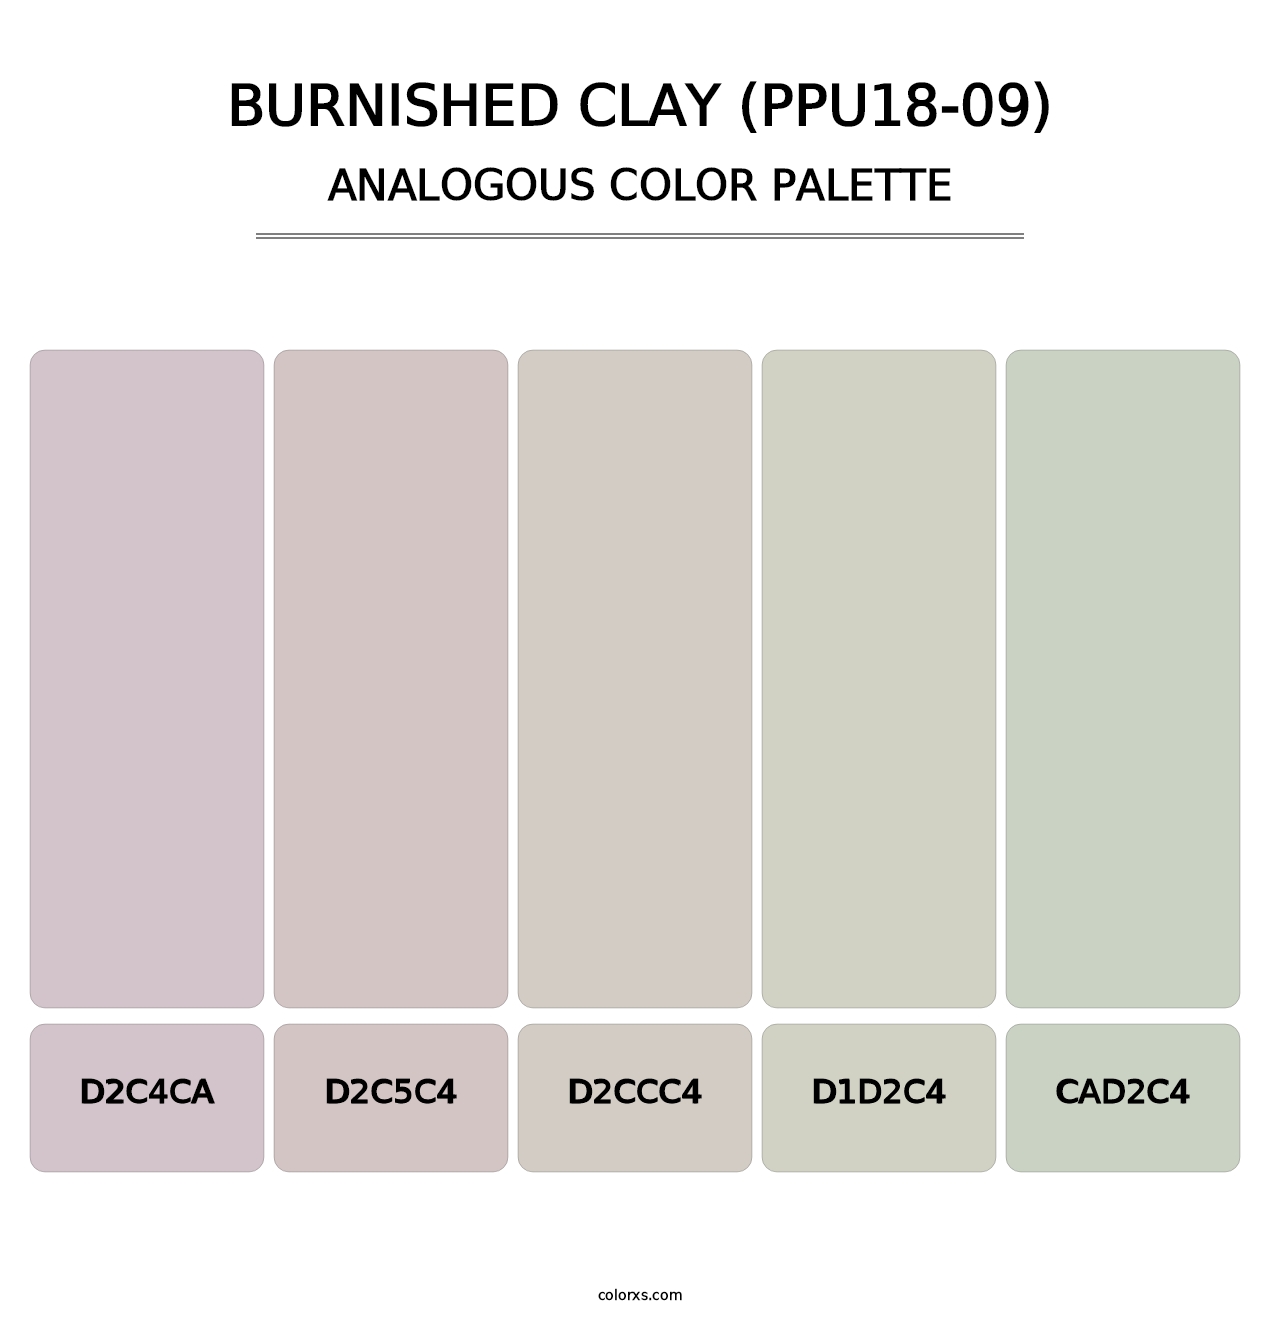 Burnished Clay (PPU18-09) - Analogous Color Palette